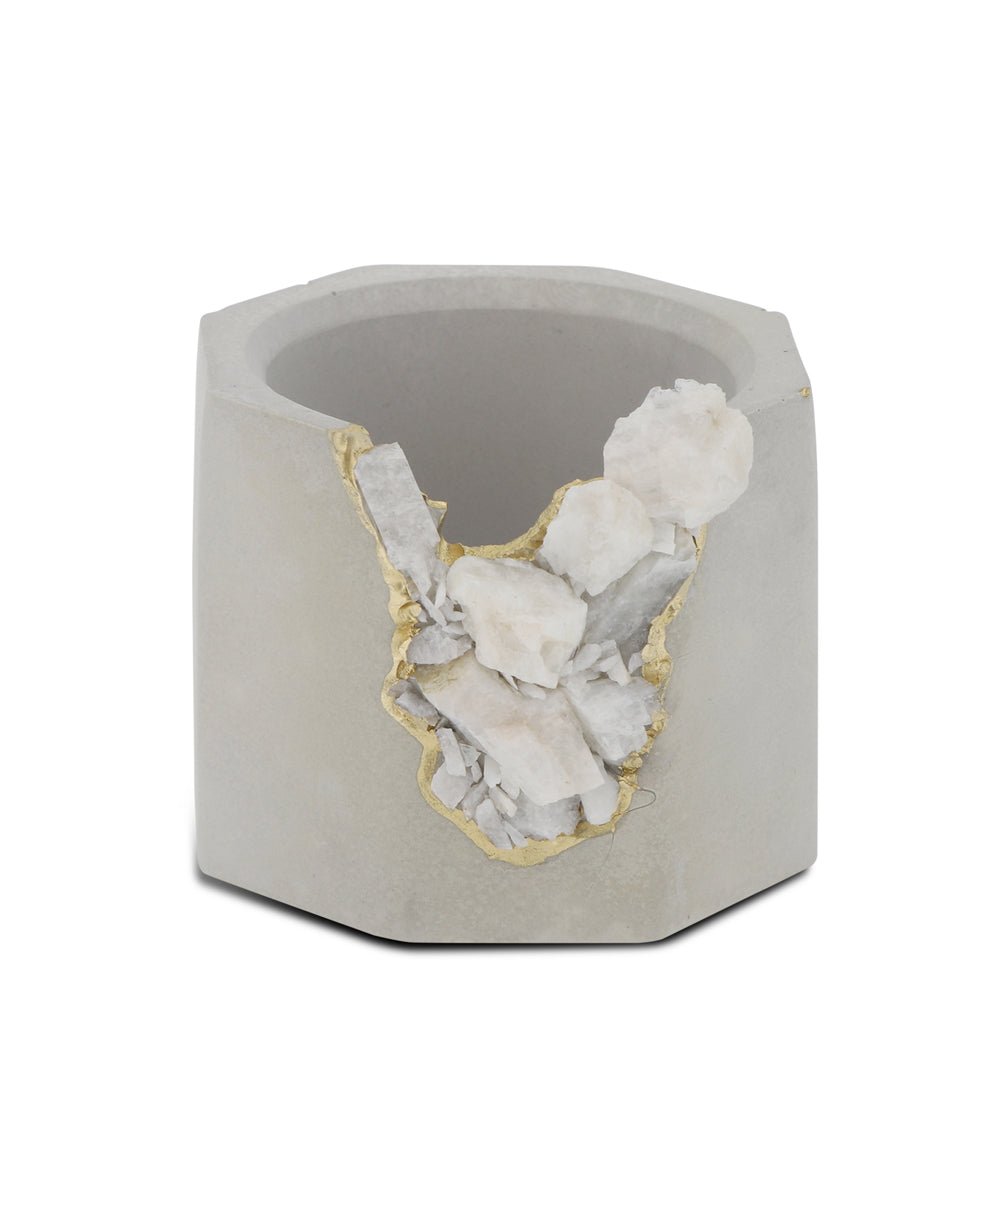 Small Gemstone and Concrete Air Plant or Tea-light Candle Holder - Pots & Planters Moonstone